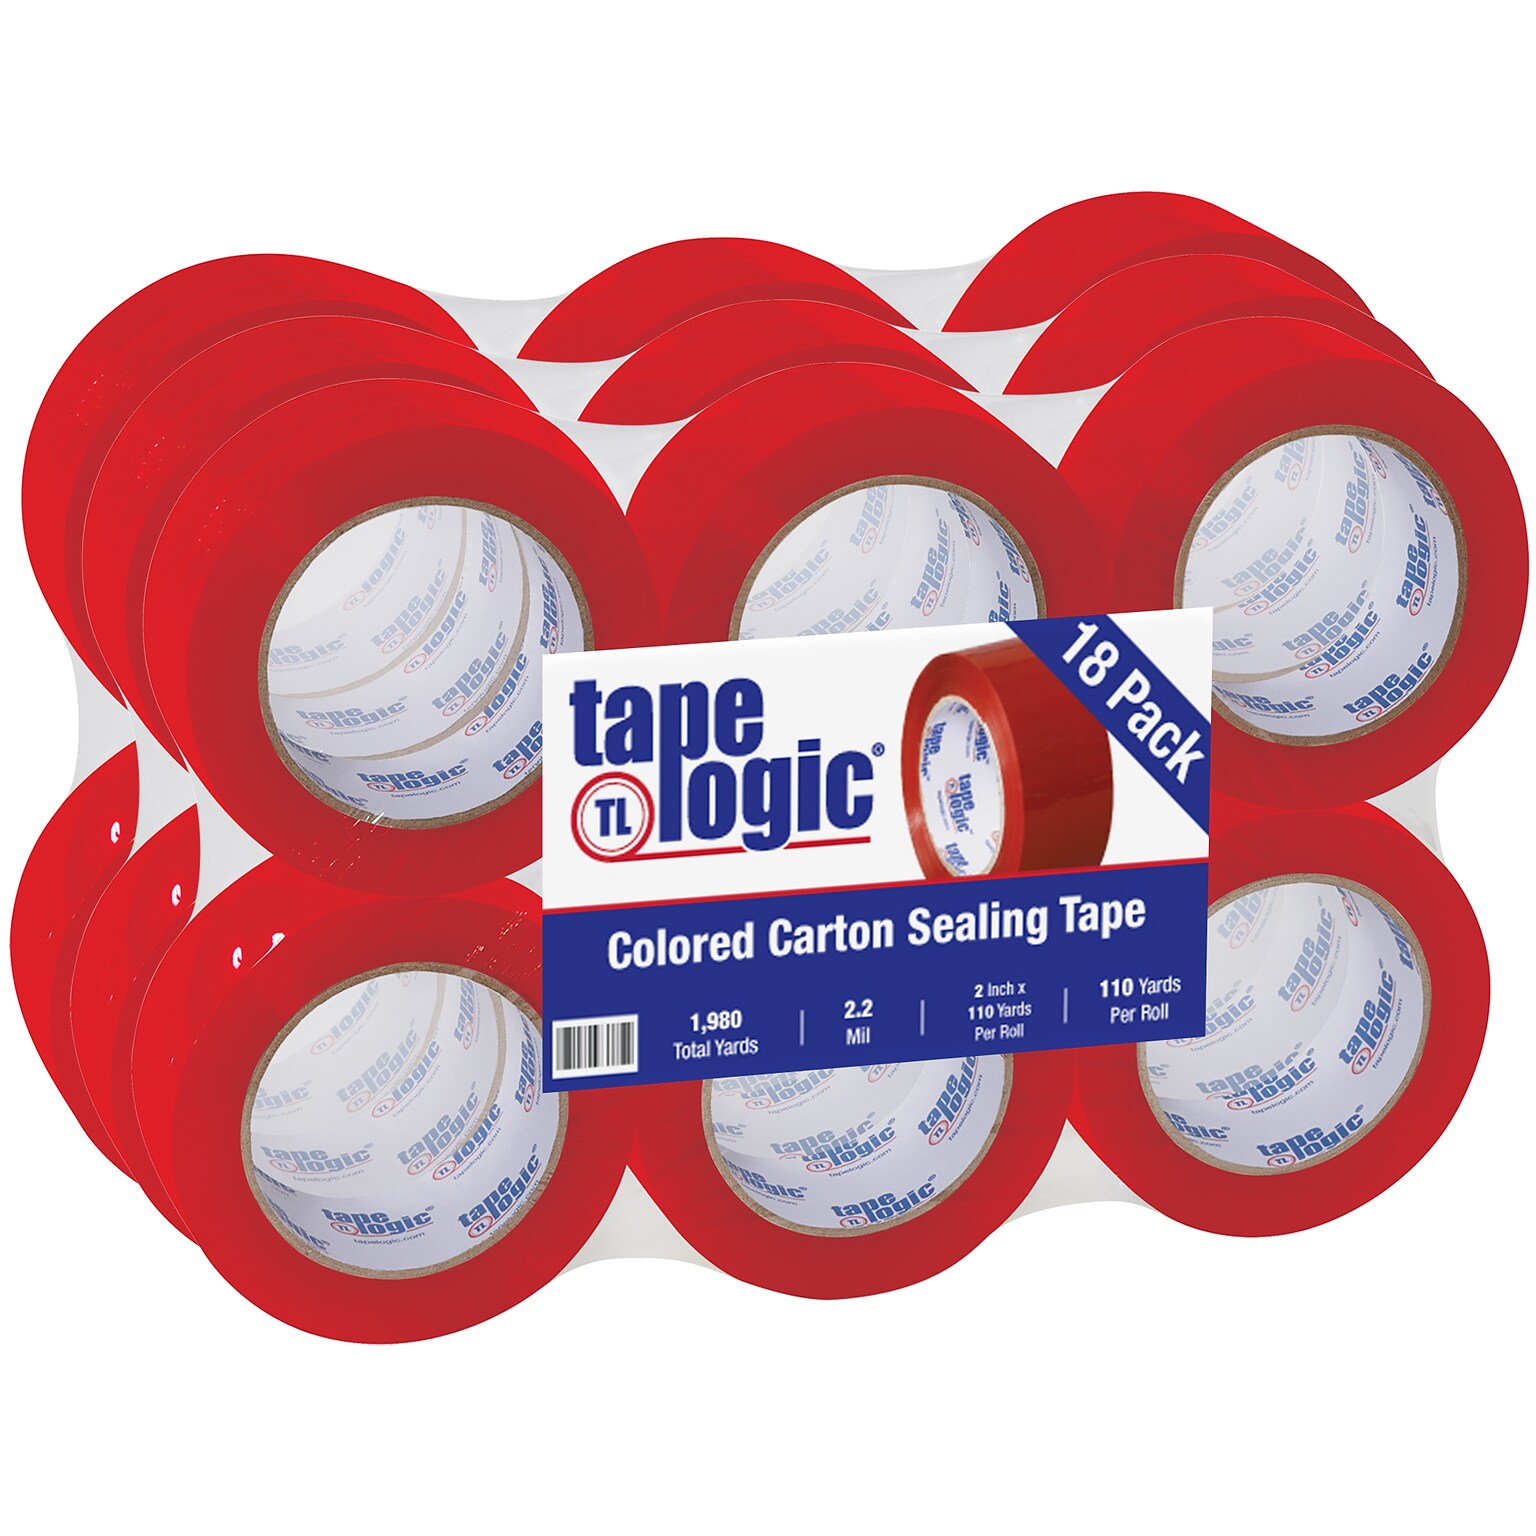 Tape Logic Colored Carton Sealing Heavy Duty Packing Tape, 2 x 110 yds., Red, 18/Carton (T90222R18PK)